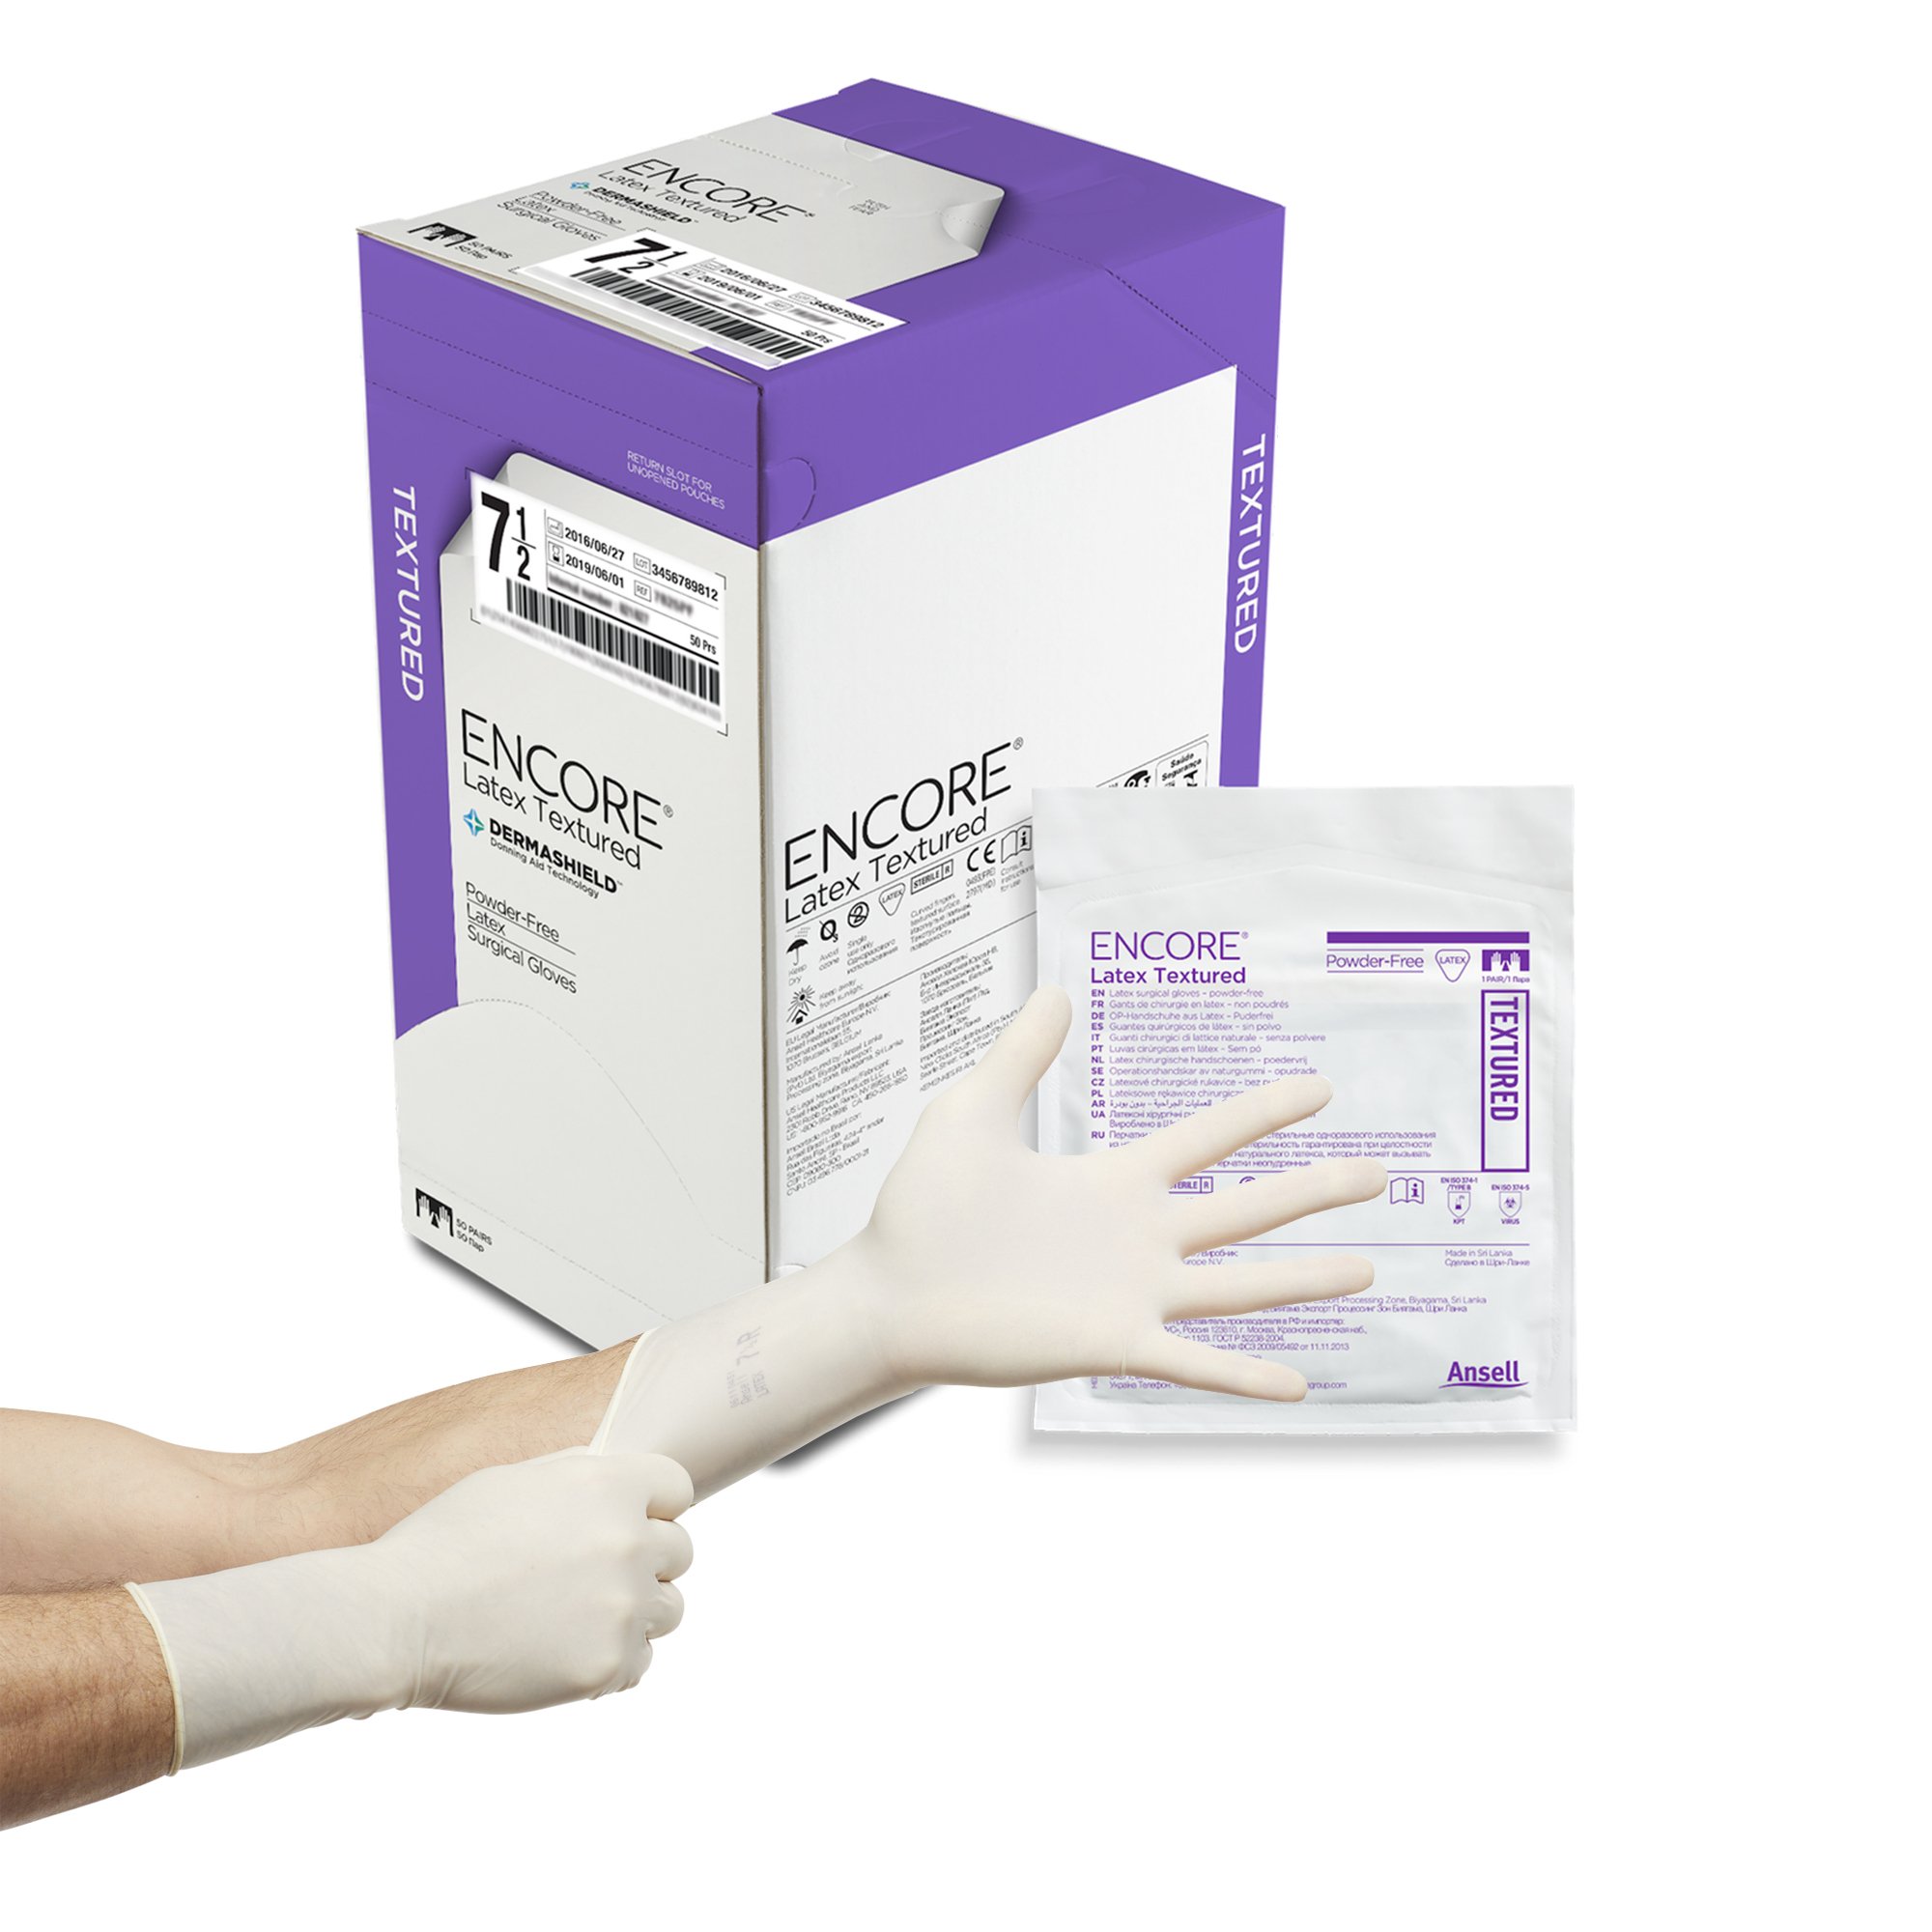 Encore Latex Textured Surgical Glove, Size 7.5, Ivory MK 293296